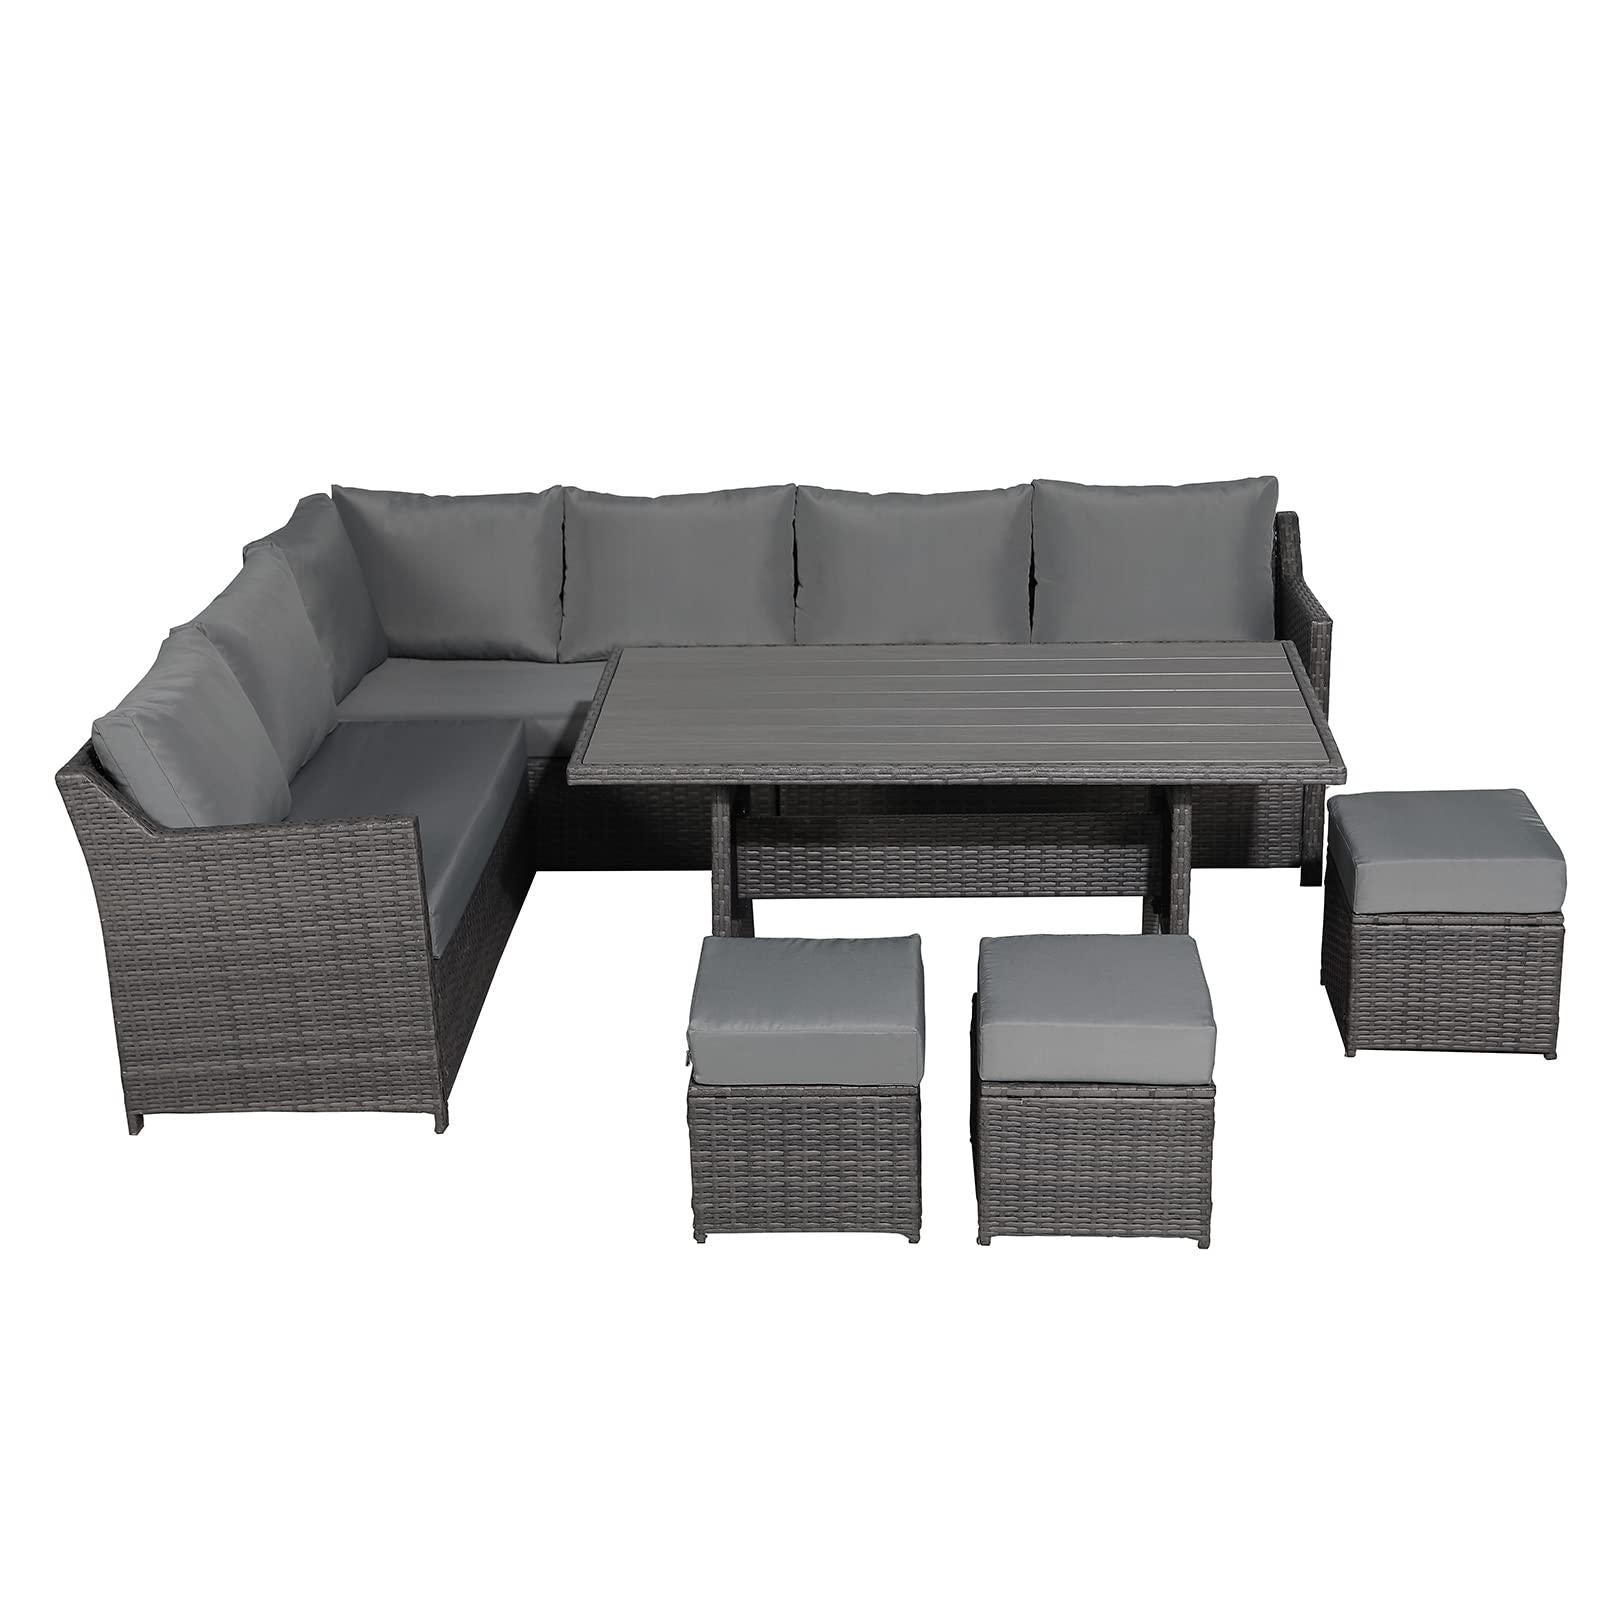 7-pc. Patio Furniture Set, Outdoor Dining Sectional Sofa Set quality design